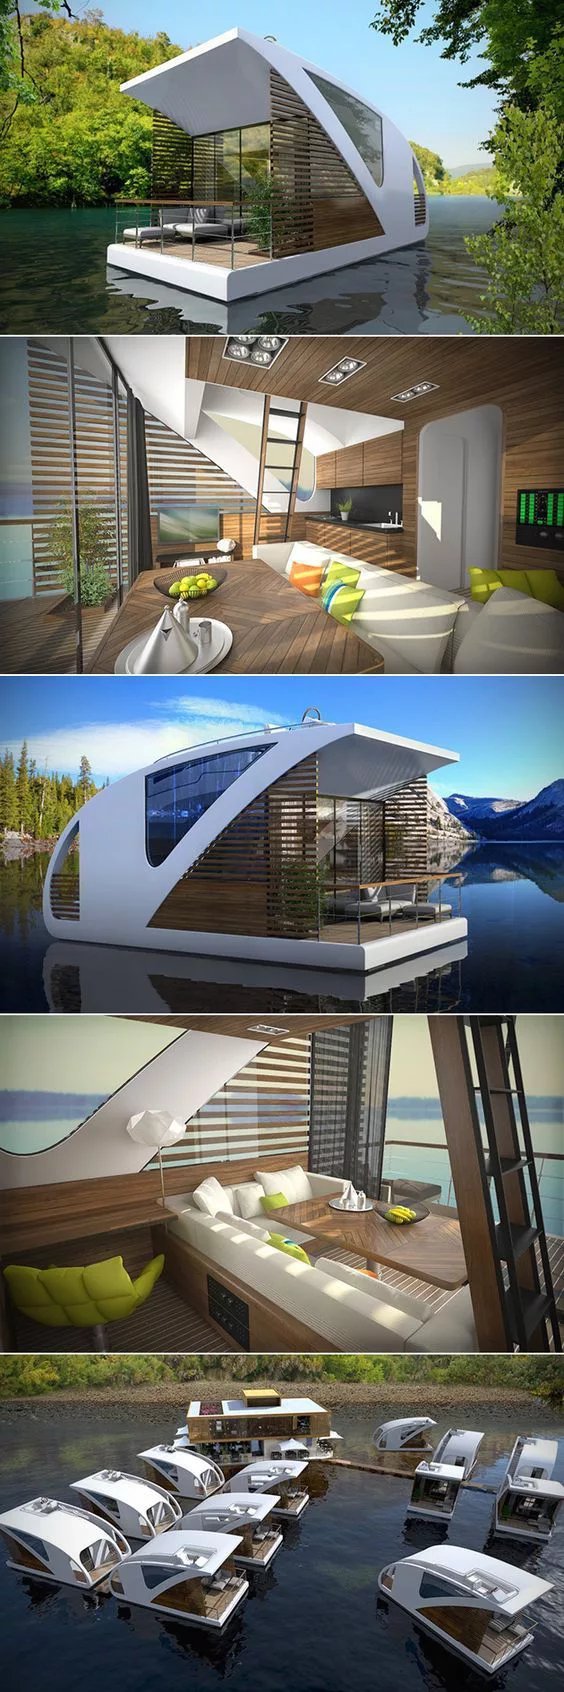 Tiny-House-4-Concept-If-you-dont-mind-floating-on-the-water-247.jpg